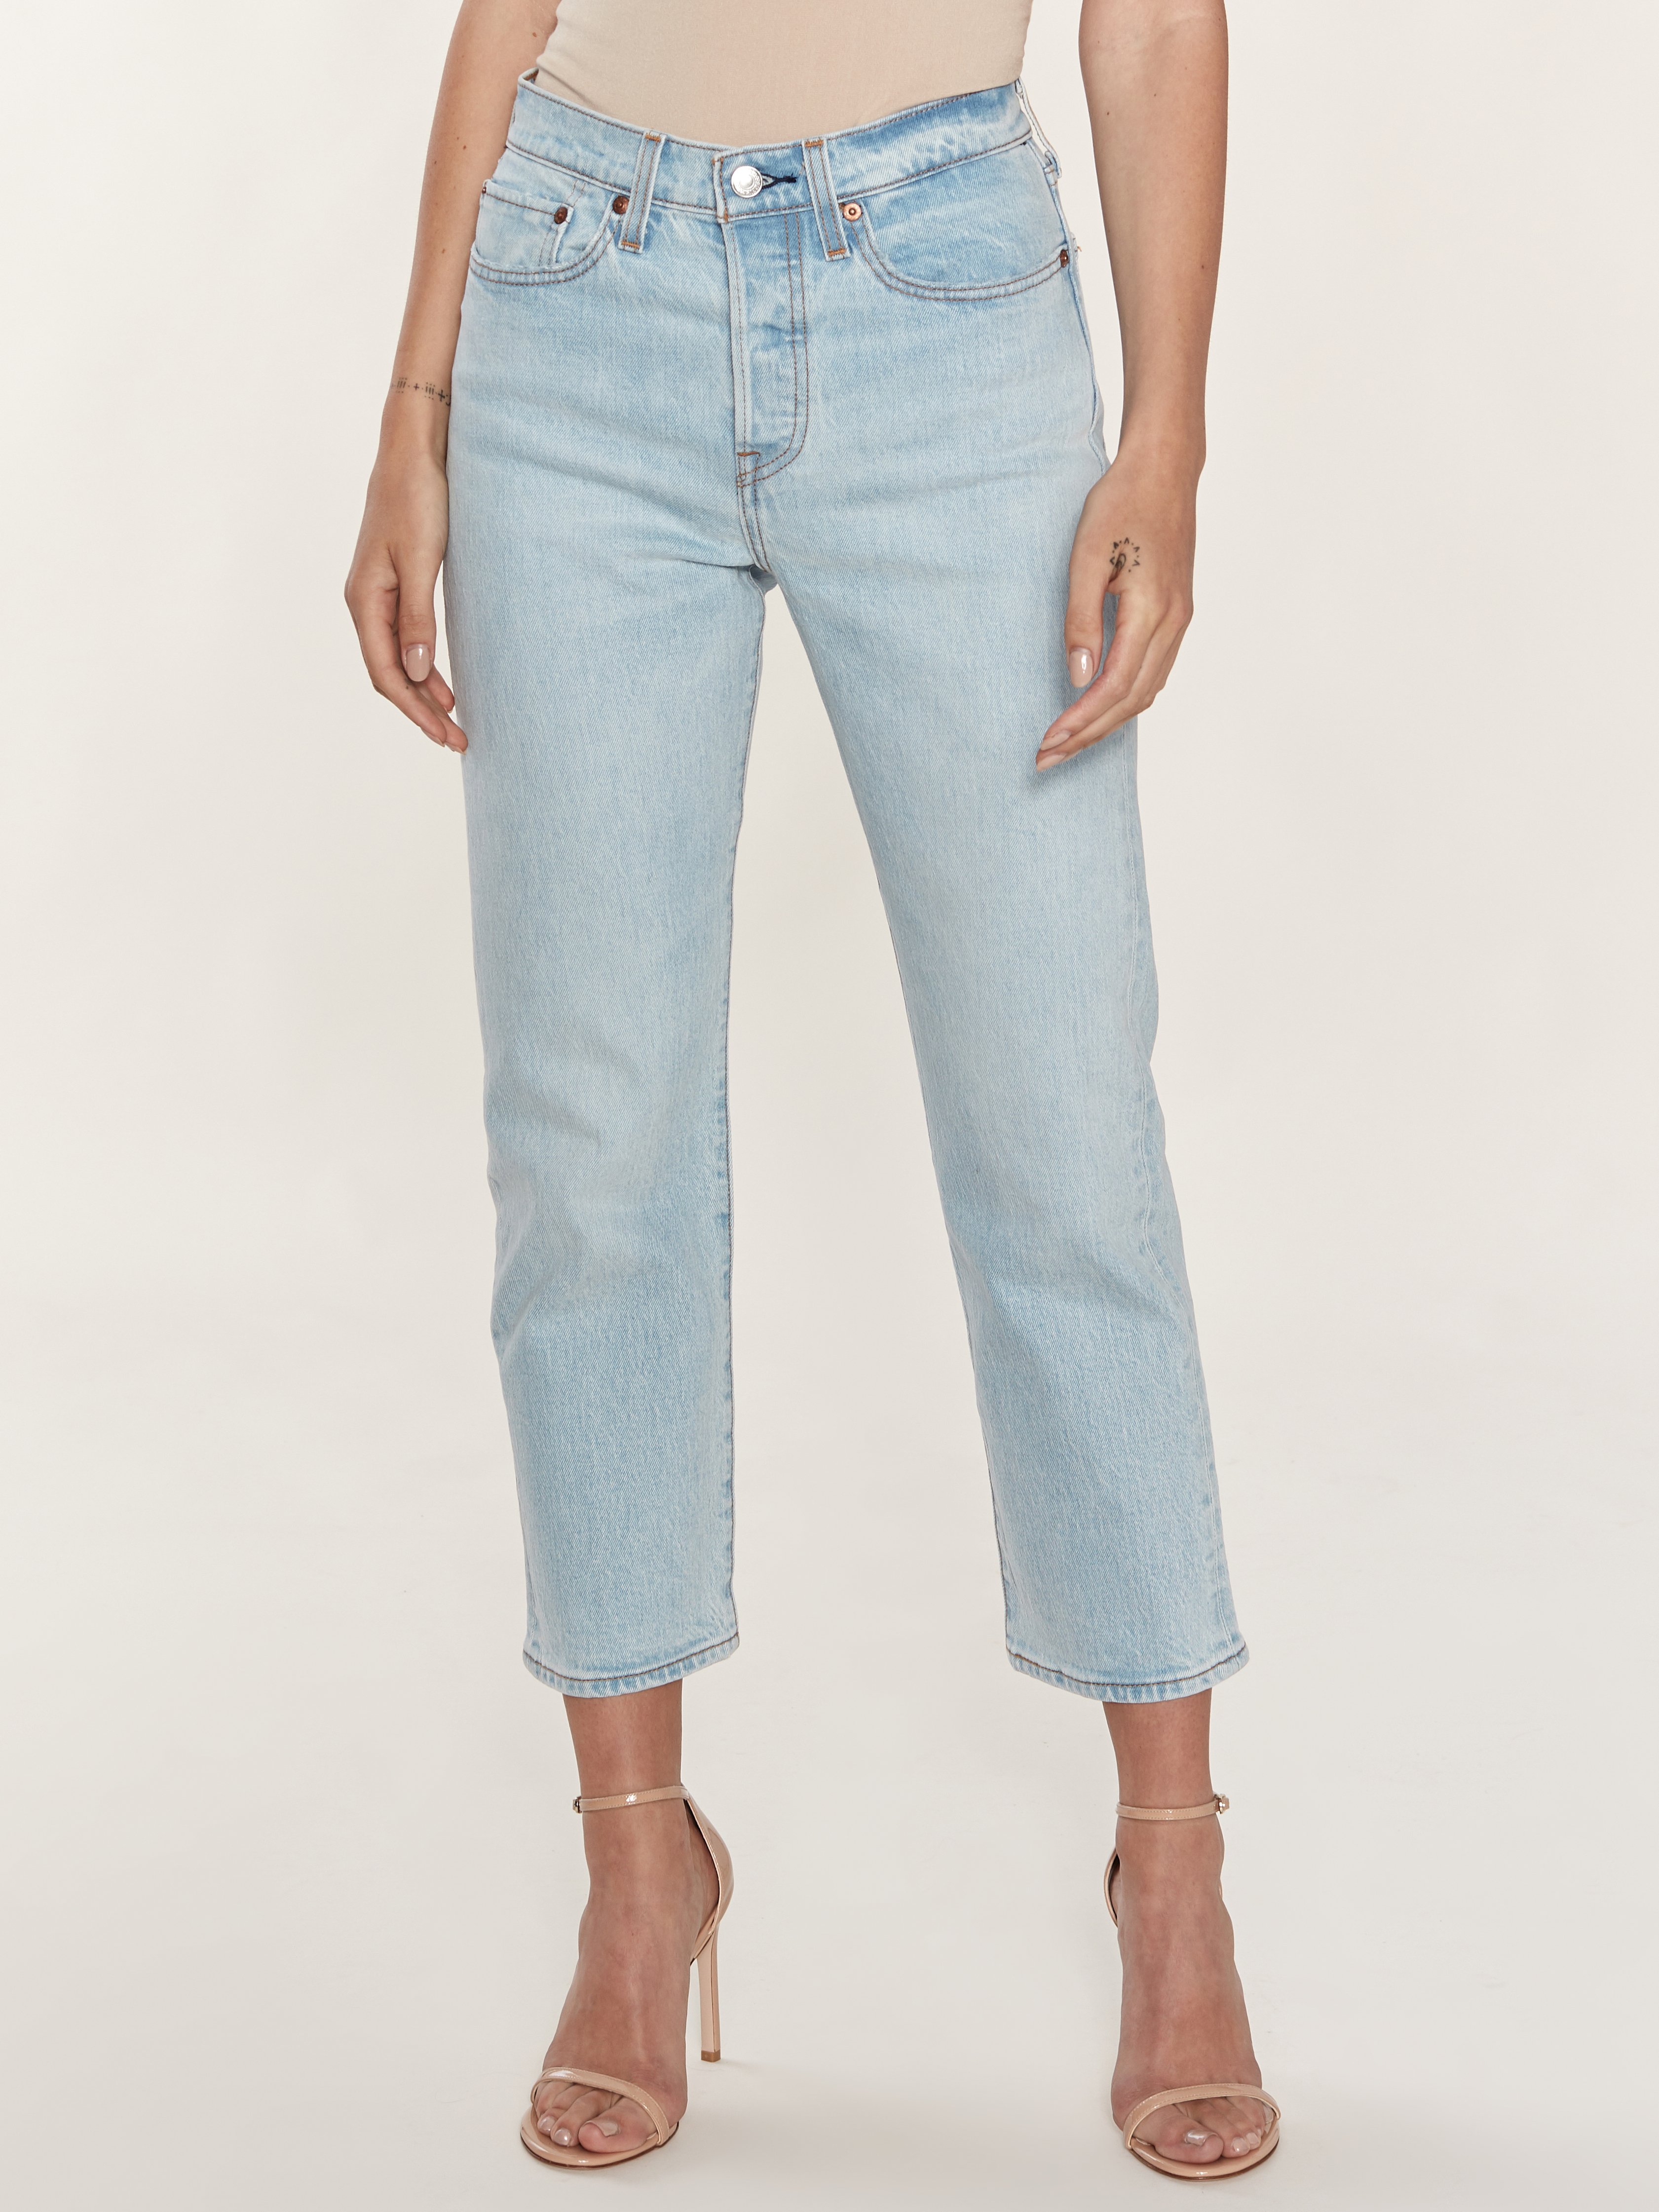 Wedgie Fit High Rise Straight Leg Jeans 